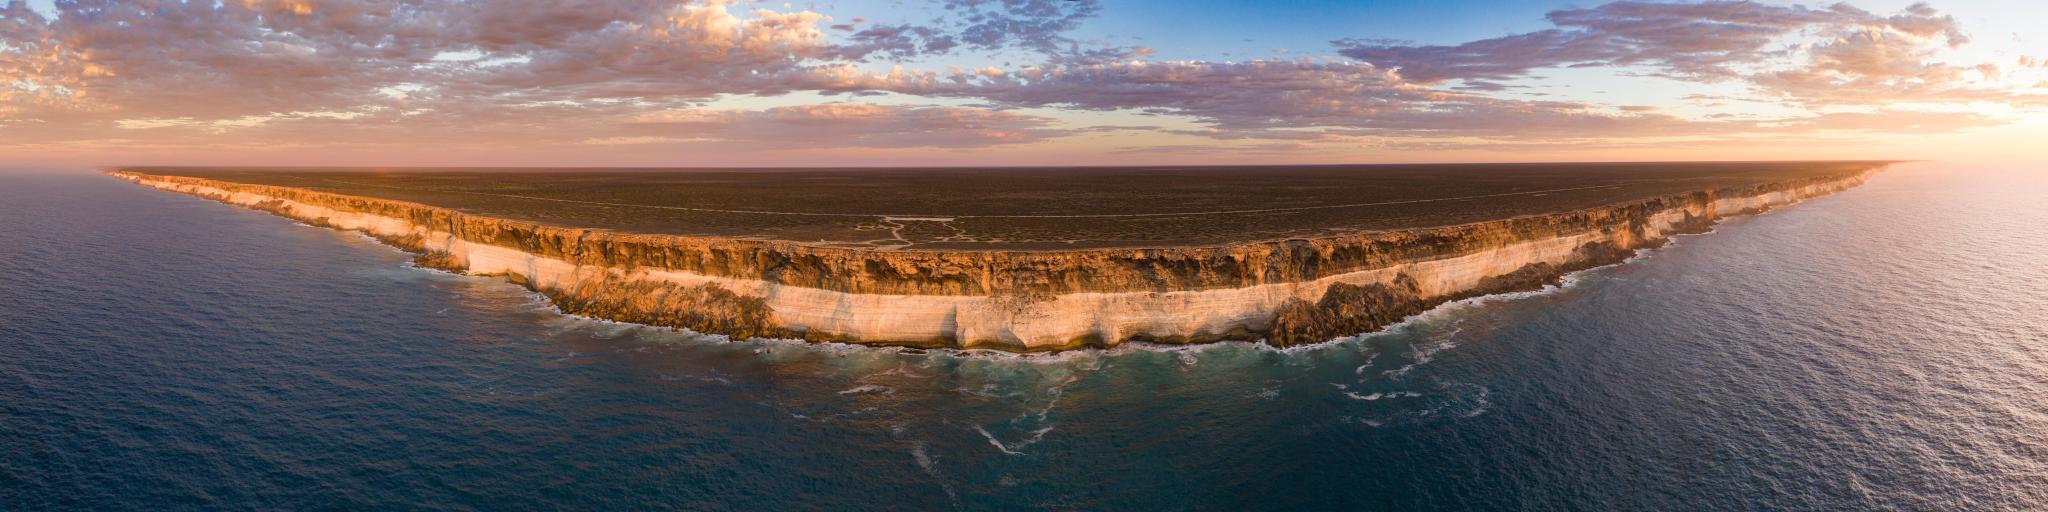 Nullarbor, South Australia taken as an aerial shot of Bunda Cliffs in the distance and the sea in the foreground as the sun is setting.